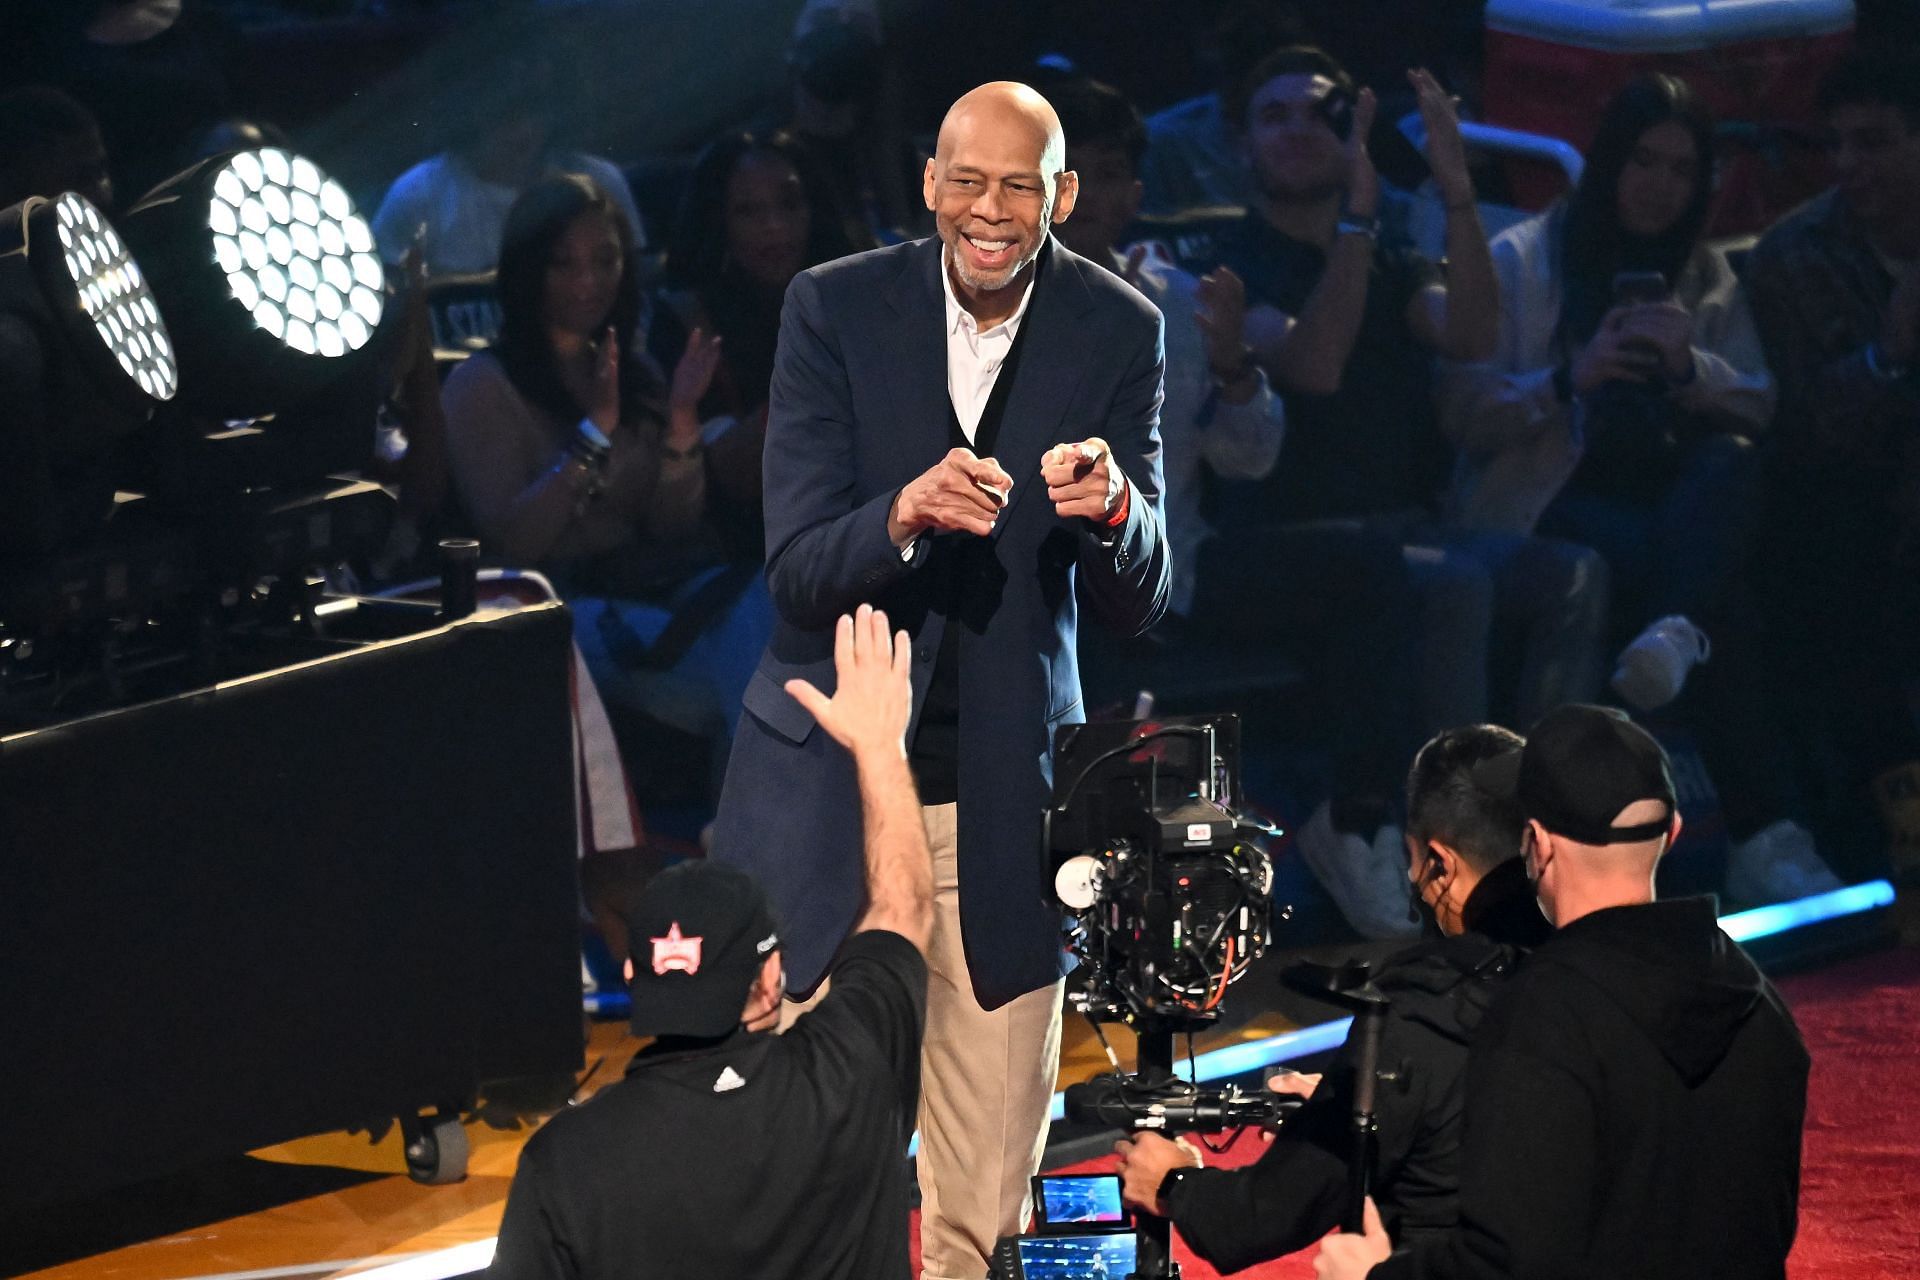 Kareem Abdul-Jabbar reacts after being unveiled as part of the NBA 75th Anniversary team.